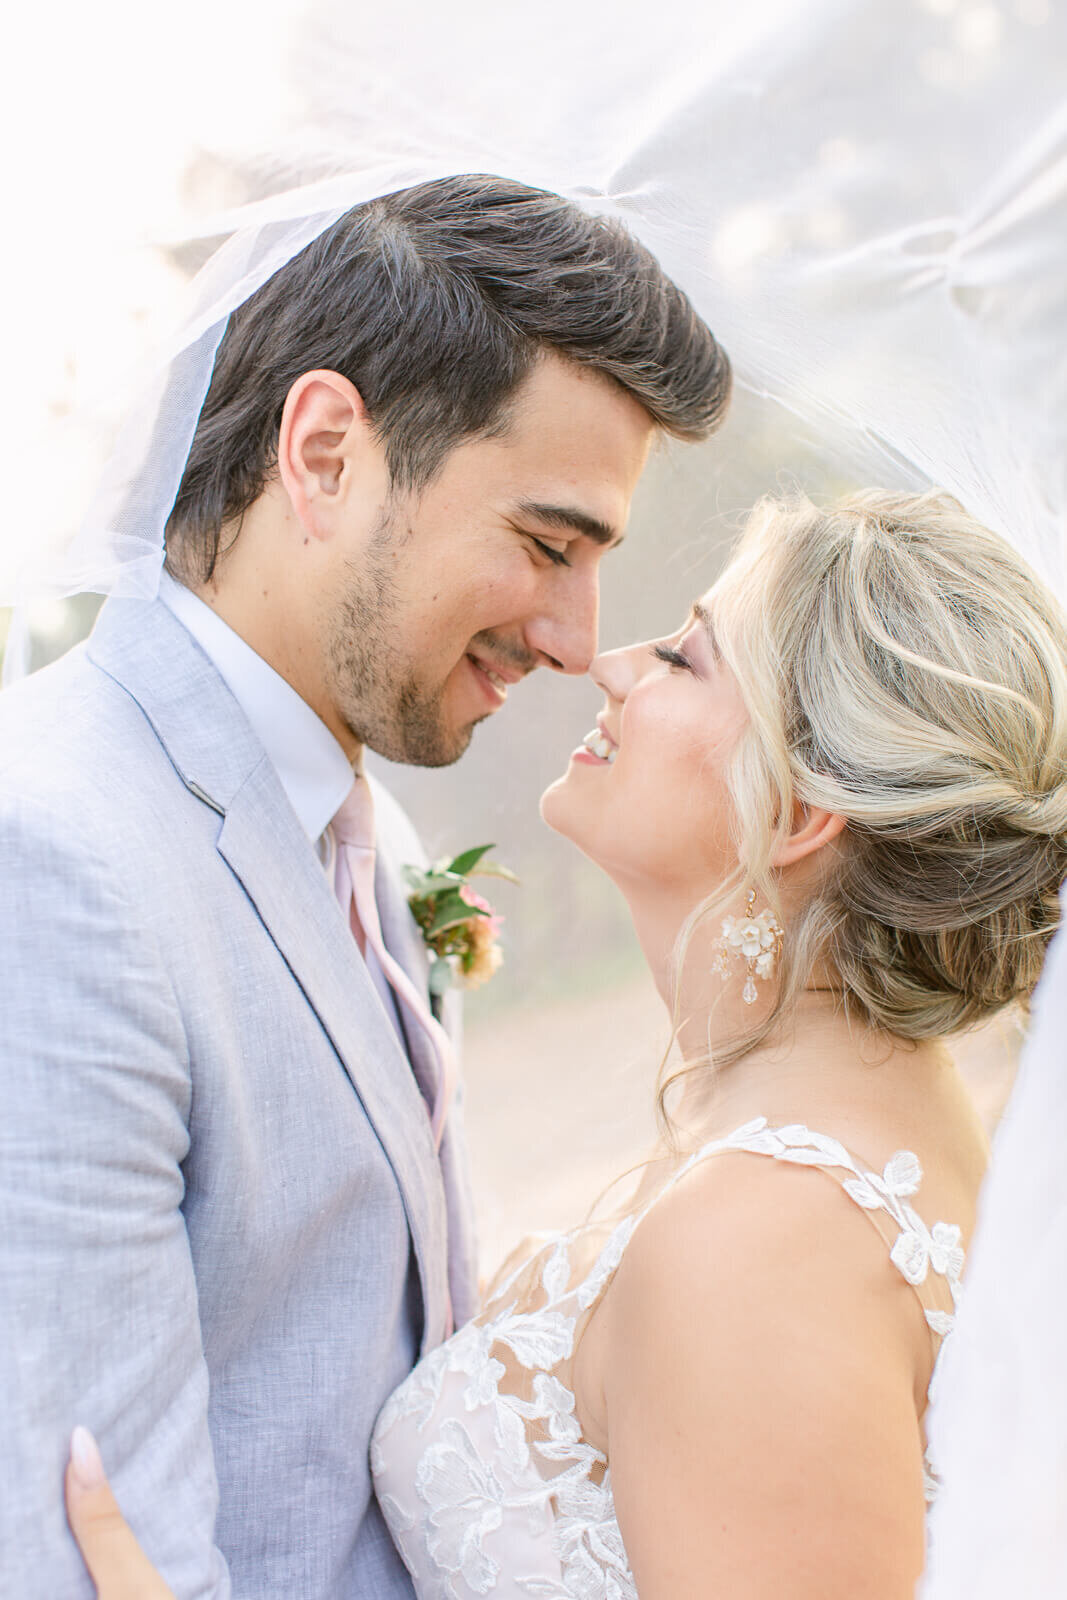 Bride and groom nose to nose under veil during wedding portraits. Captured by Bethany Aubre Photography.